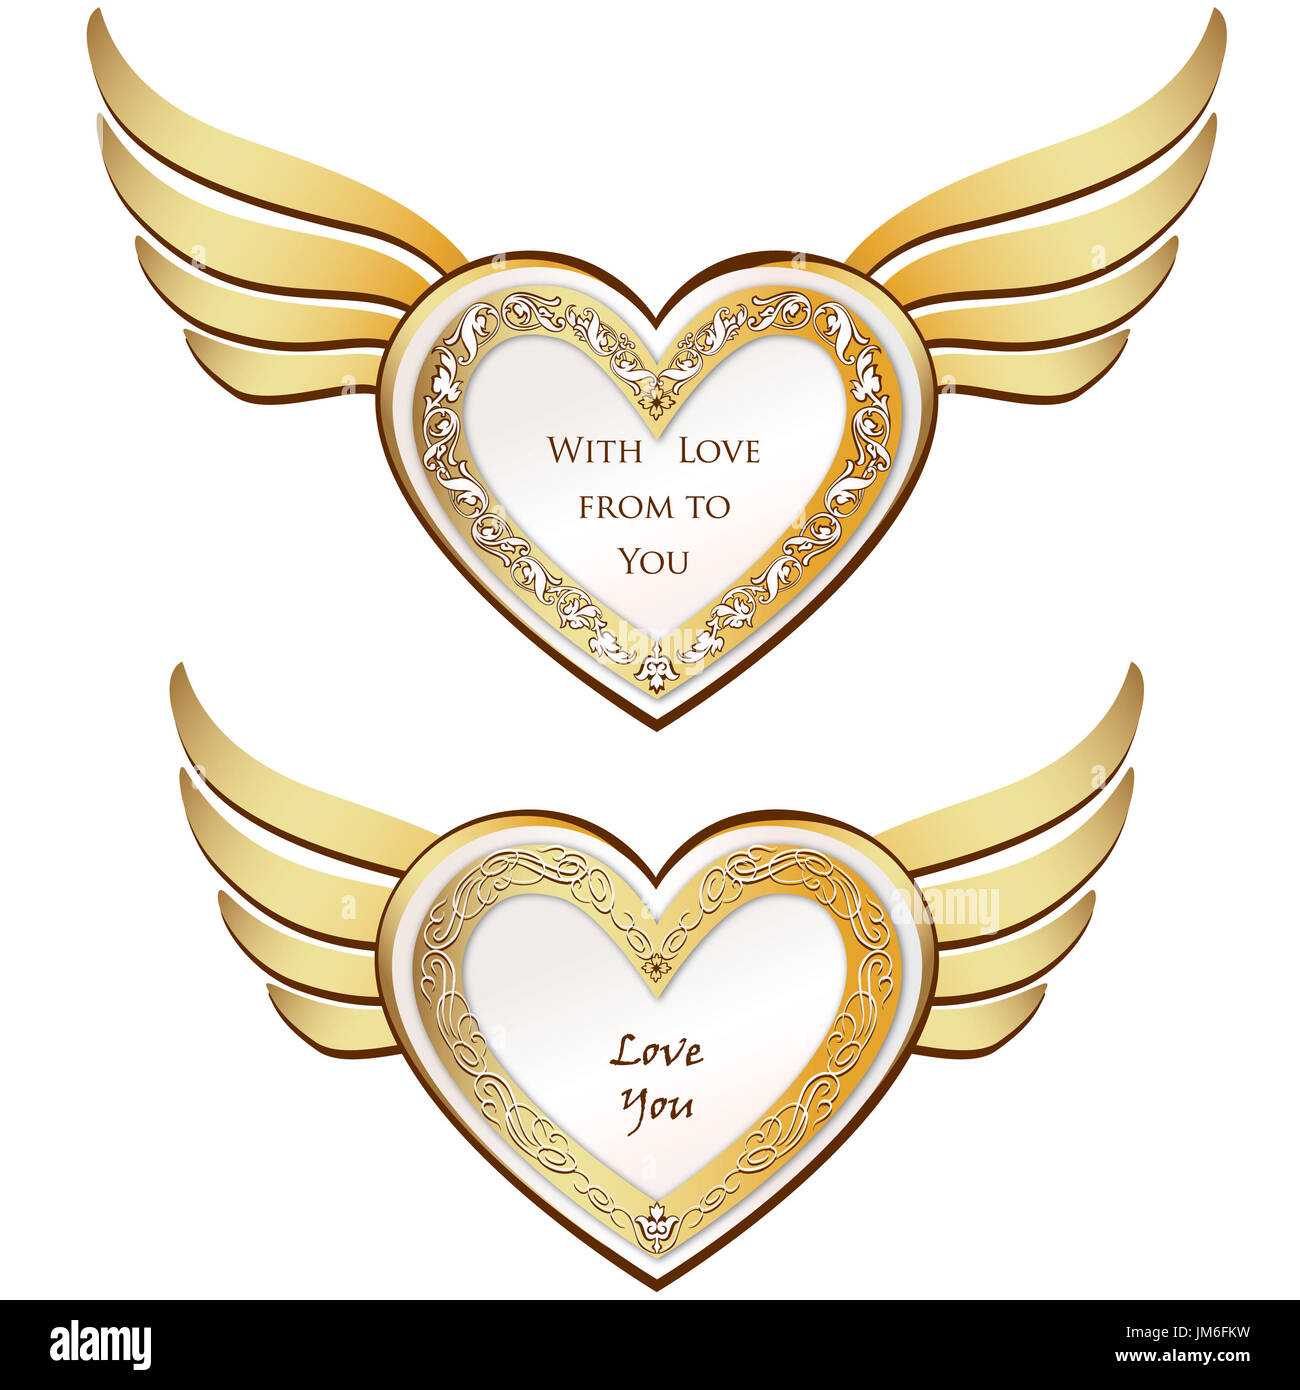 Golden Wing Heart Set Love Hearts Pattern For Valentine S Day Holiday Ornamental Decor Element Good For Greeting Card Design Stock Photo Alamy